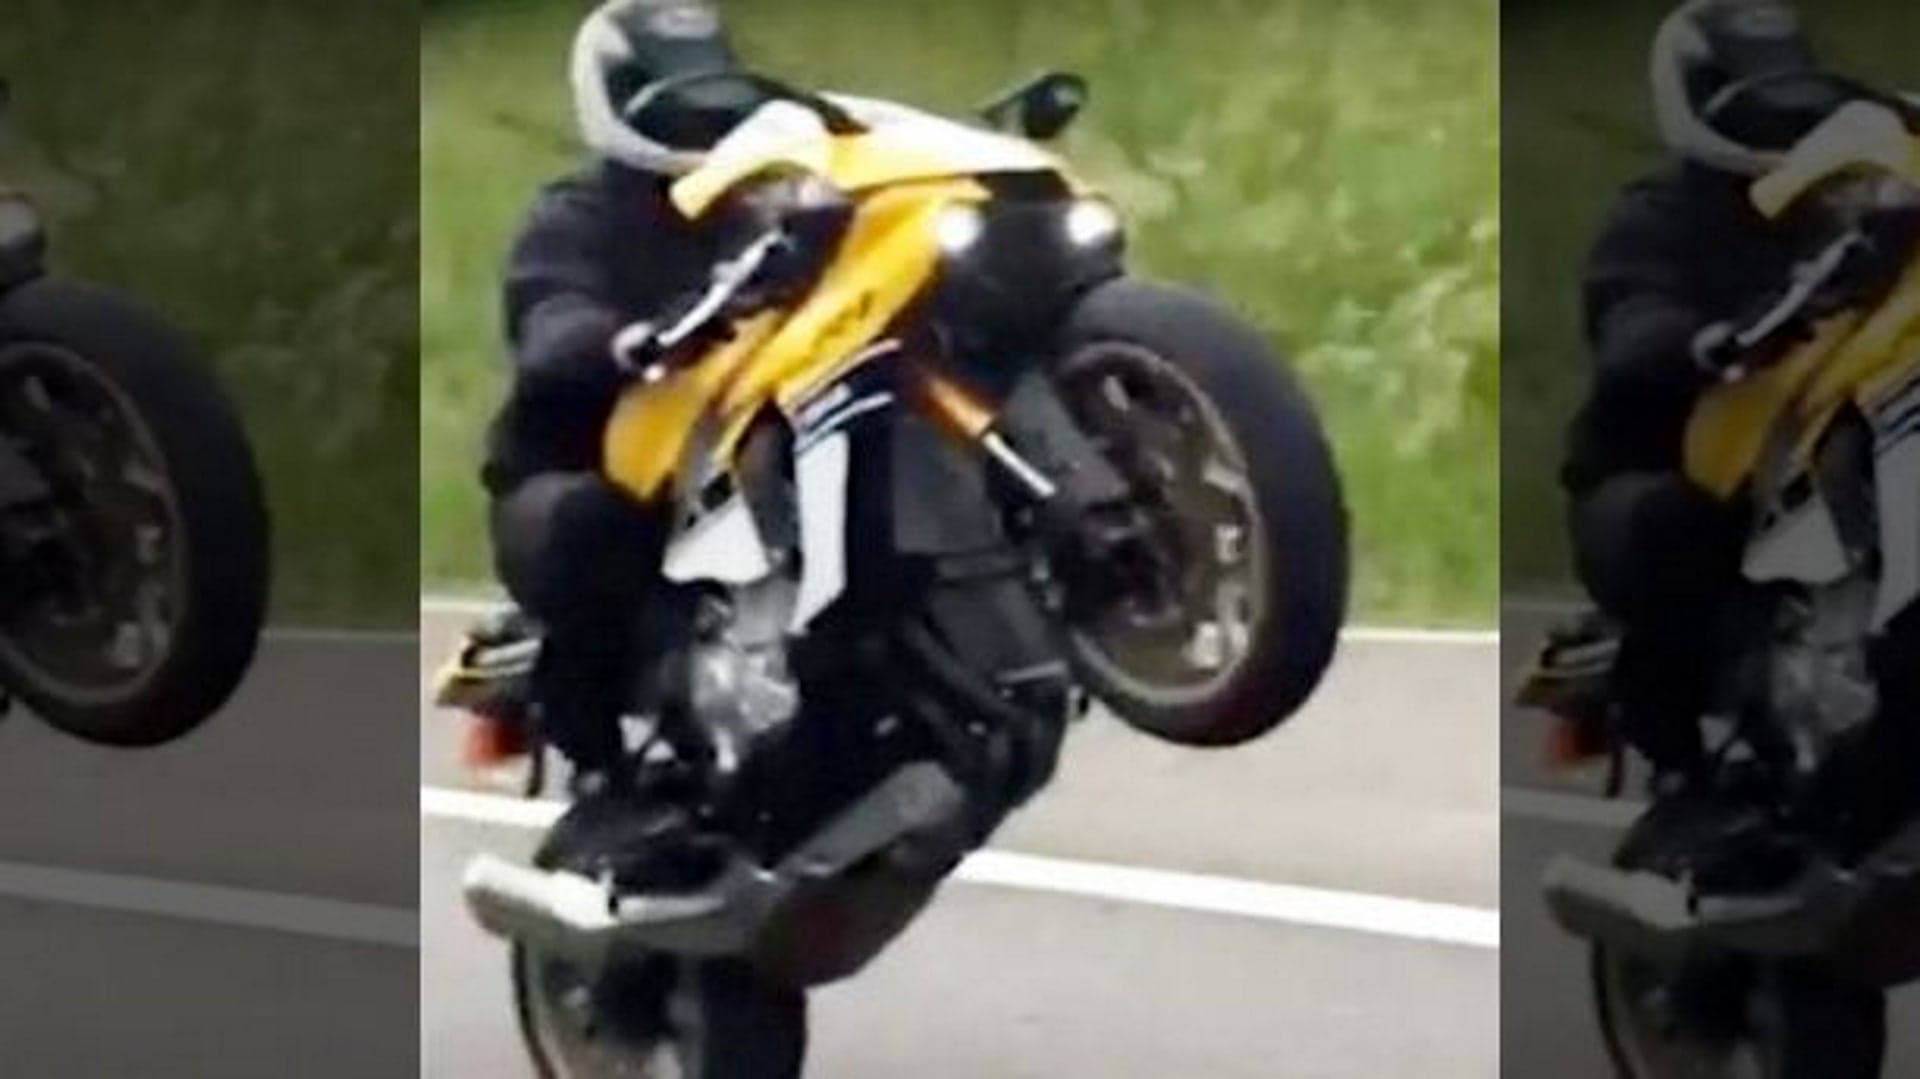 Britain’s Fastest Speeder Ever Jailed After Filming Himself Doing 189 MPH